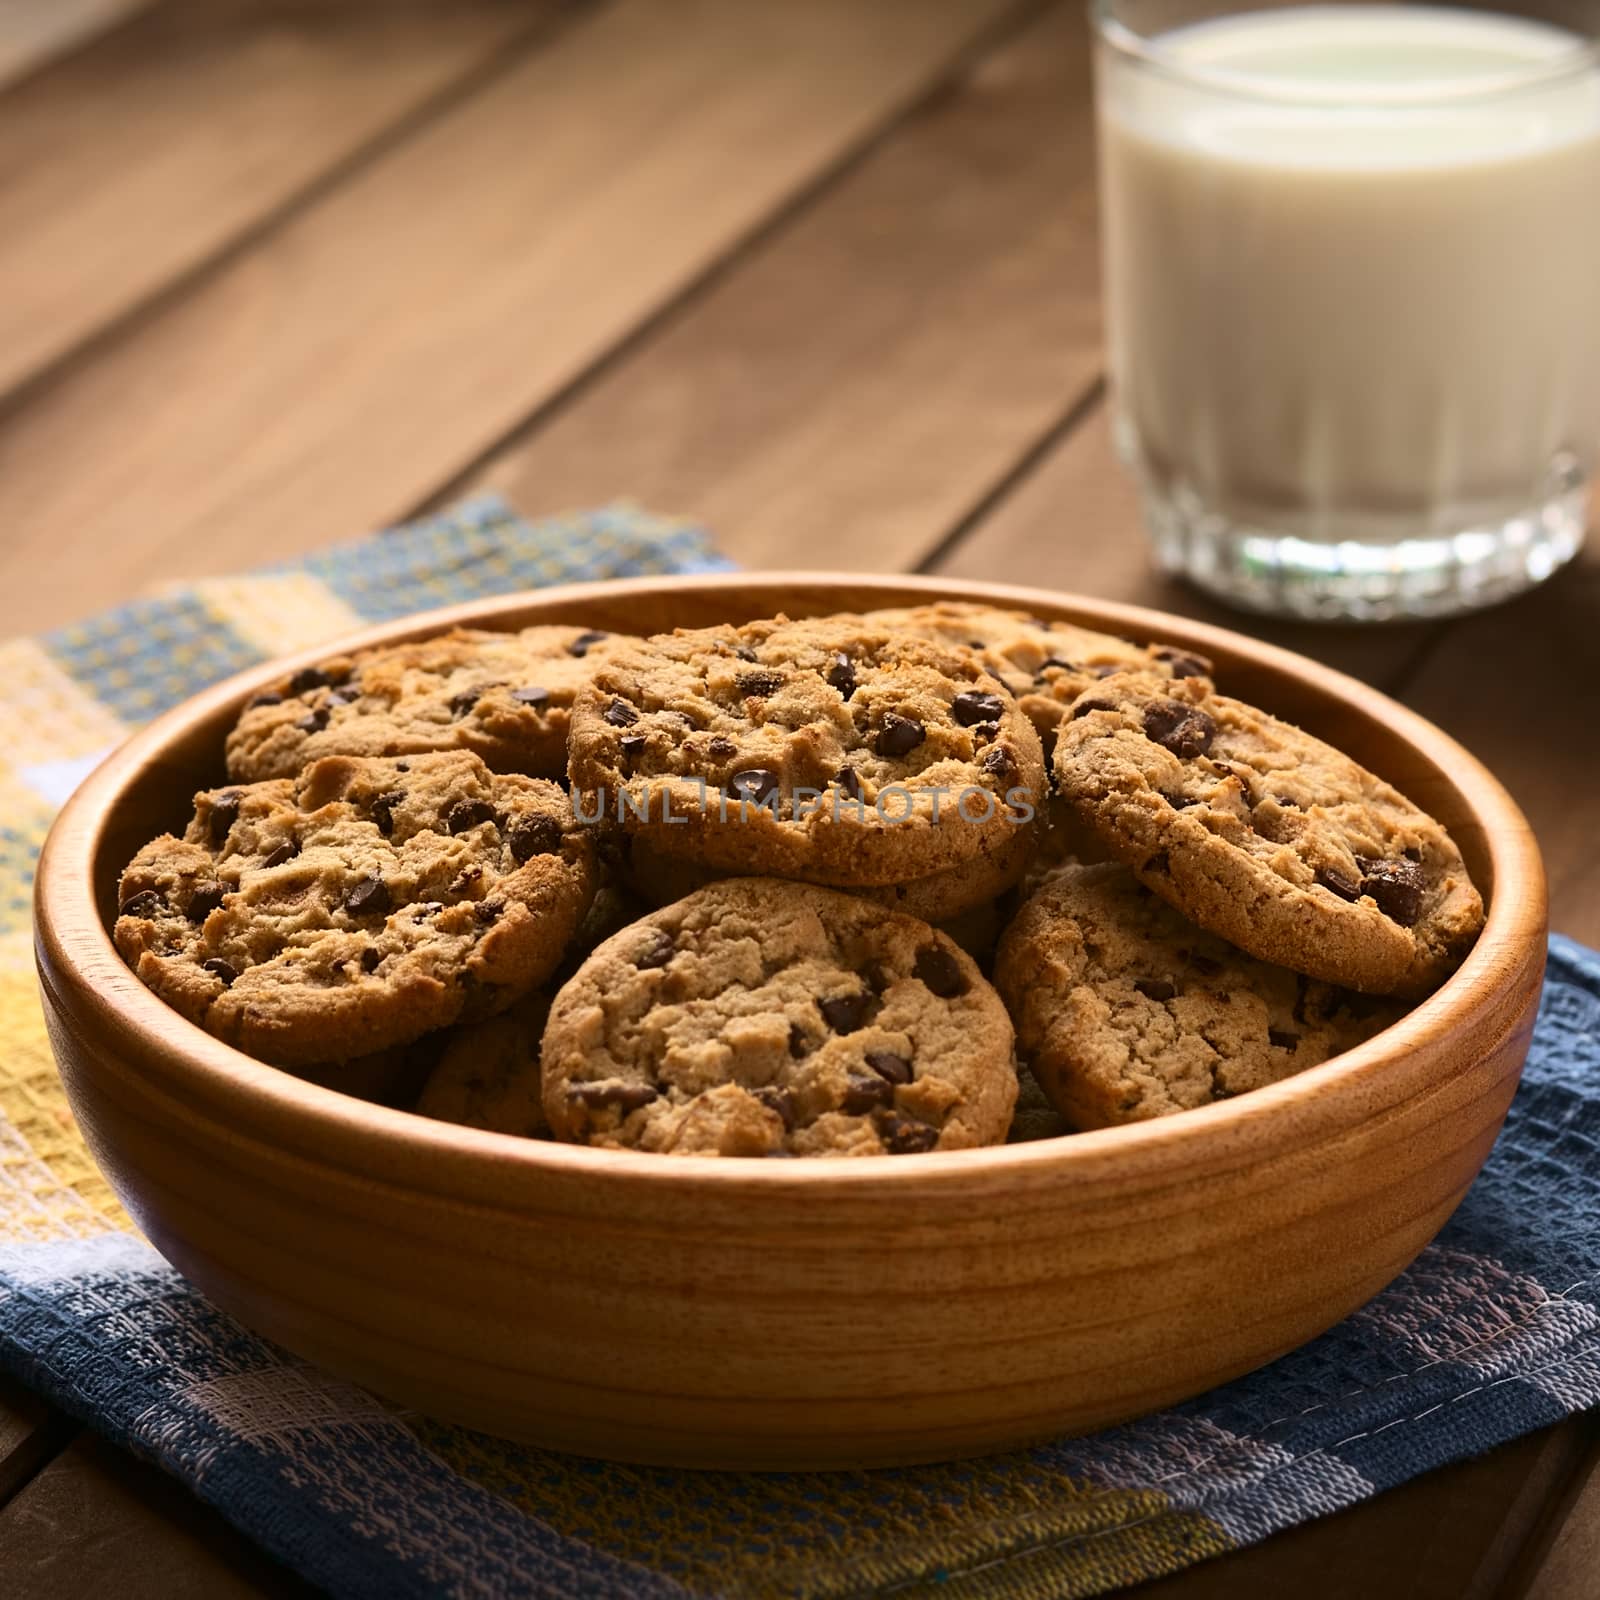 Chocolate Chip Cookies with Milk by ildi